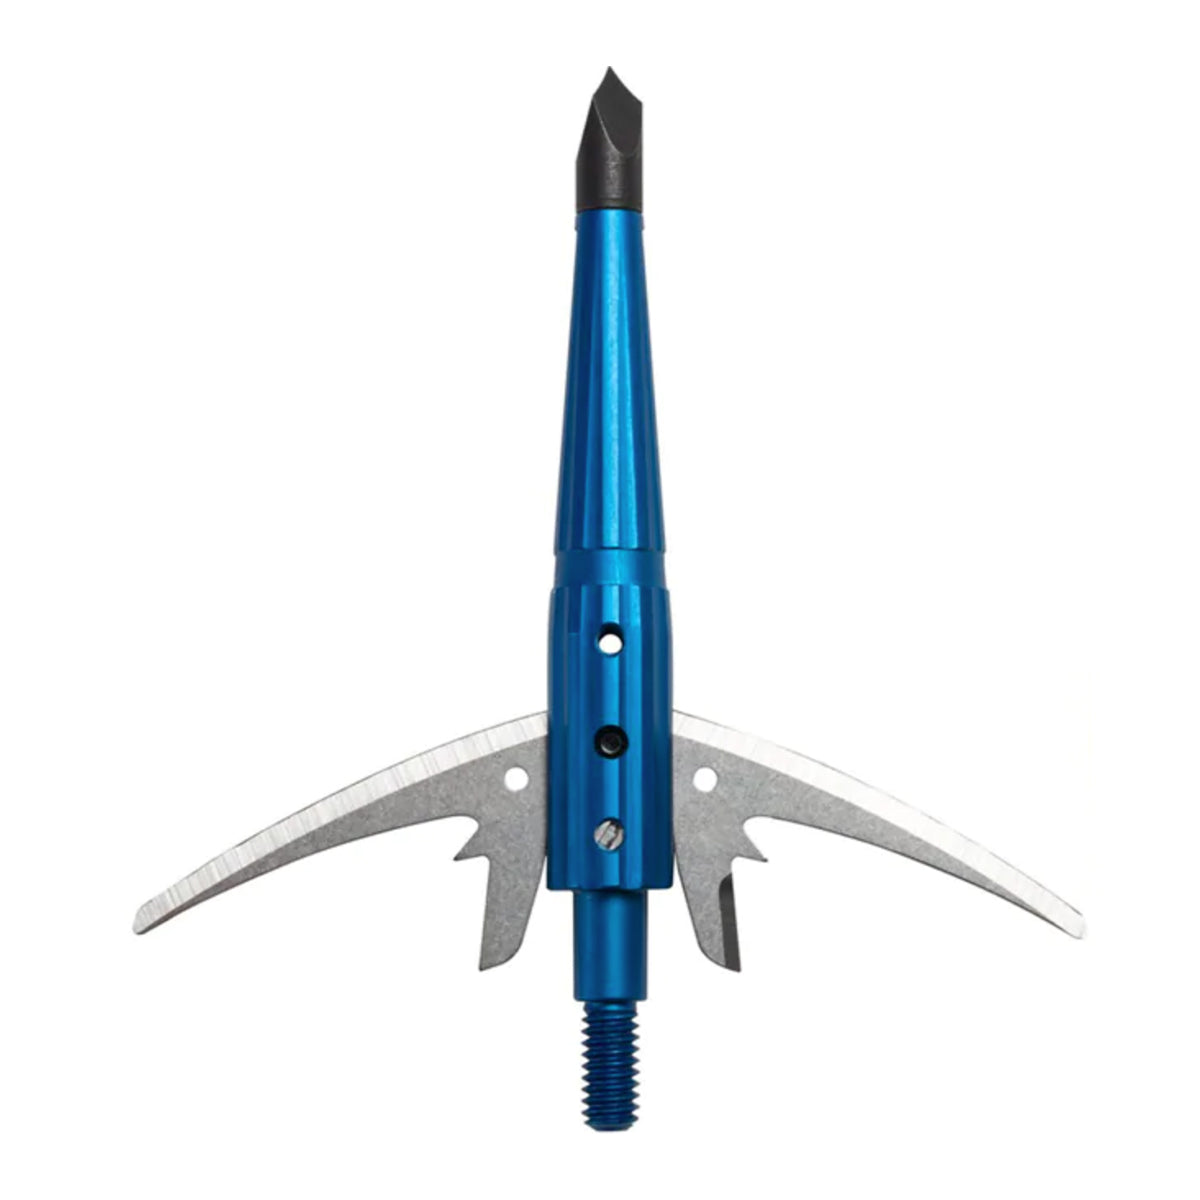 Swhacker Levi Morgan Signature Series #269 Broadheads in  by GOHUNT | Swhacker - GOHUNT Shop